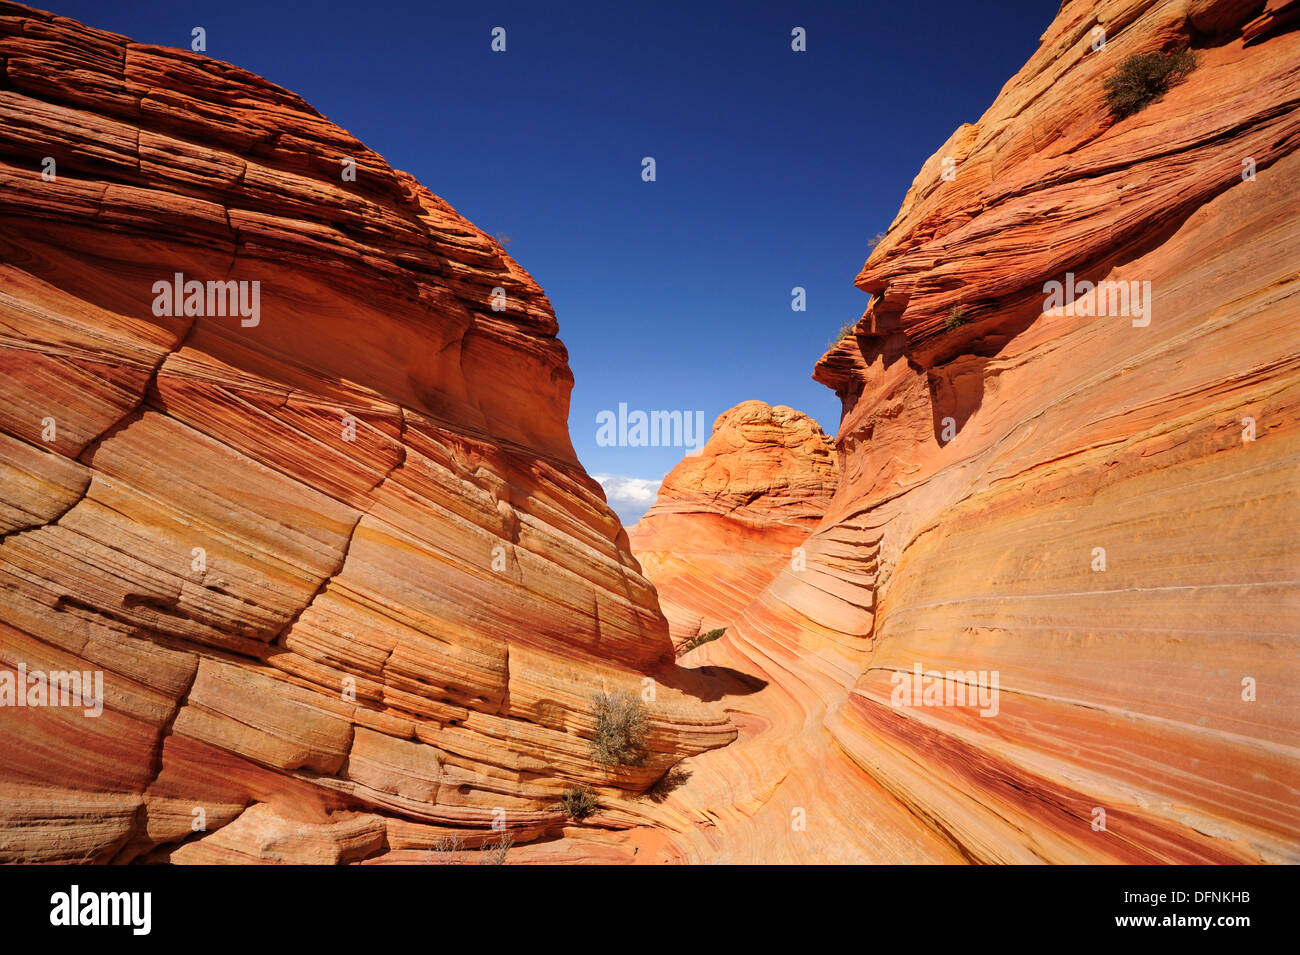 Red sandstone formation, Coyote Buttes, Paria Canyon, Vermilion Cliffs National Monument, Arizona, Southwest, USA, America Stock Photo